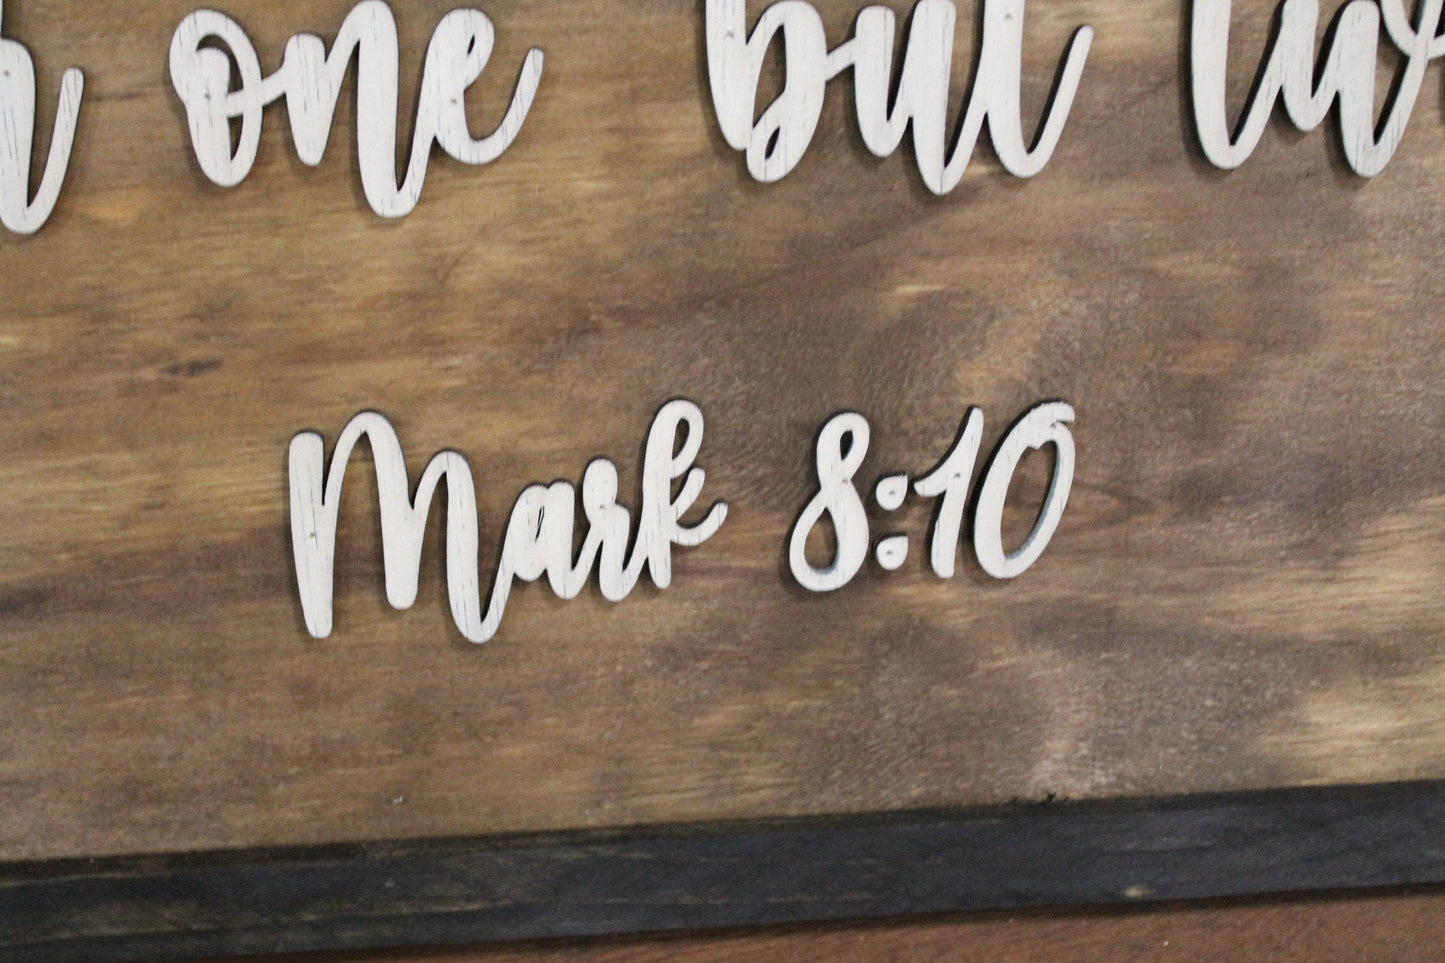 No Longer One But Two, Mark 8:10, Scripture, Wedding, Party, 3D Raised Text,Large, Framed, Sign, Rustic, Primitive, Barn, Wood, Country